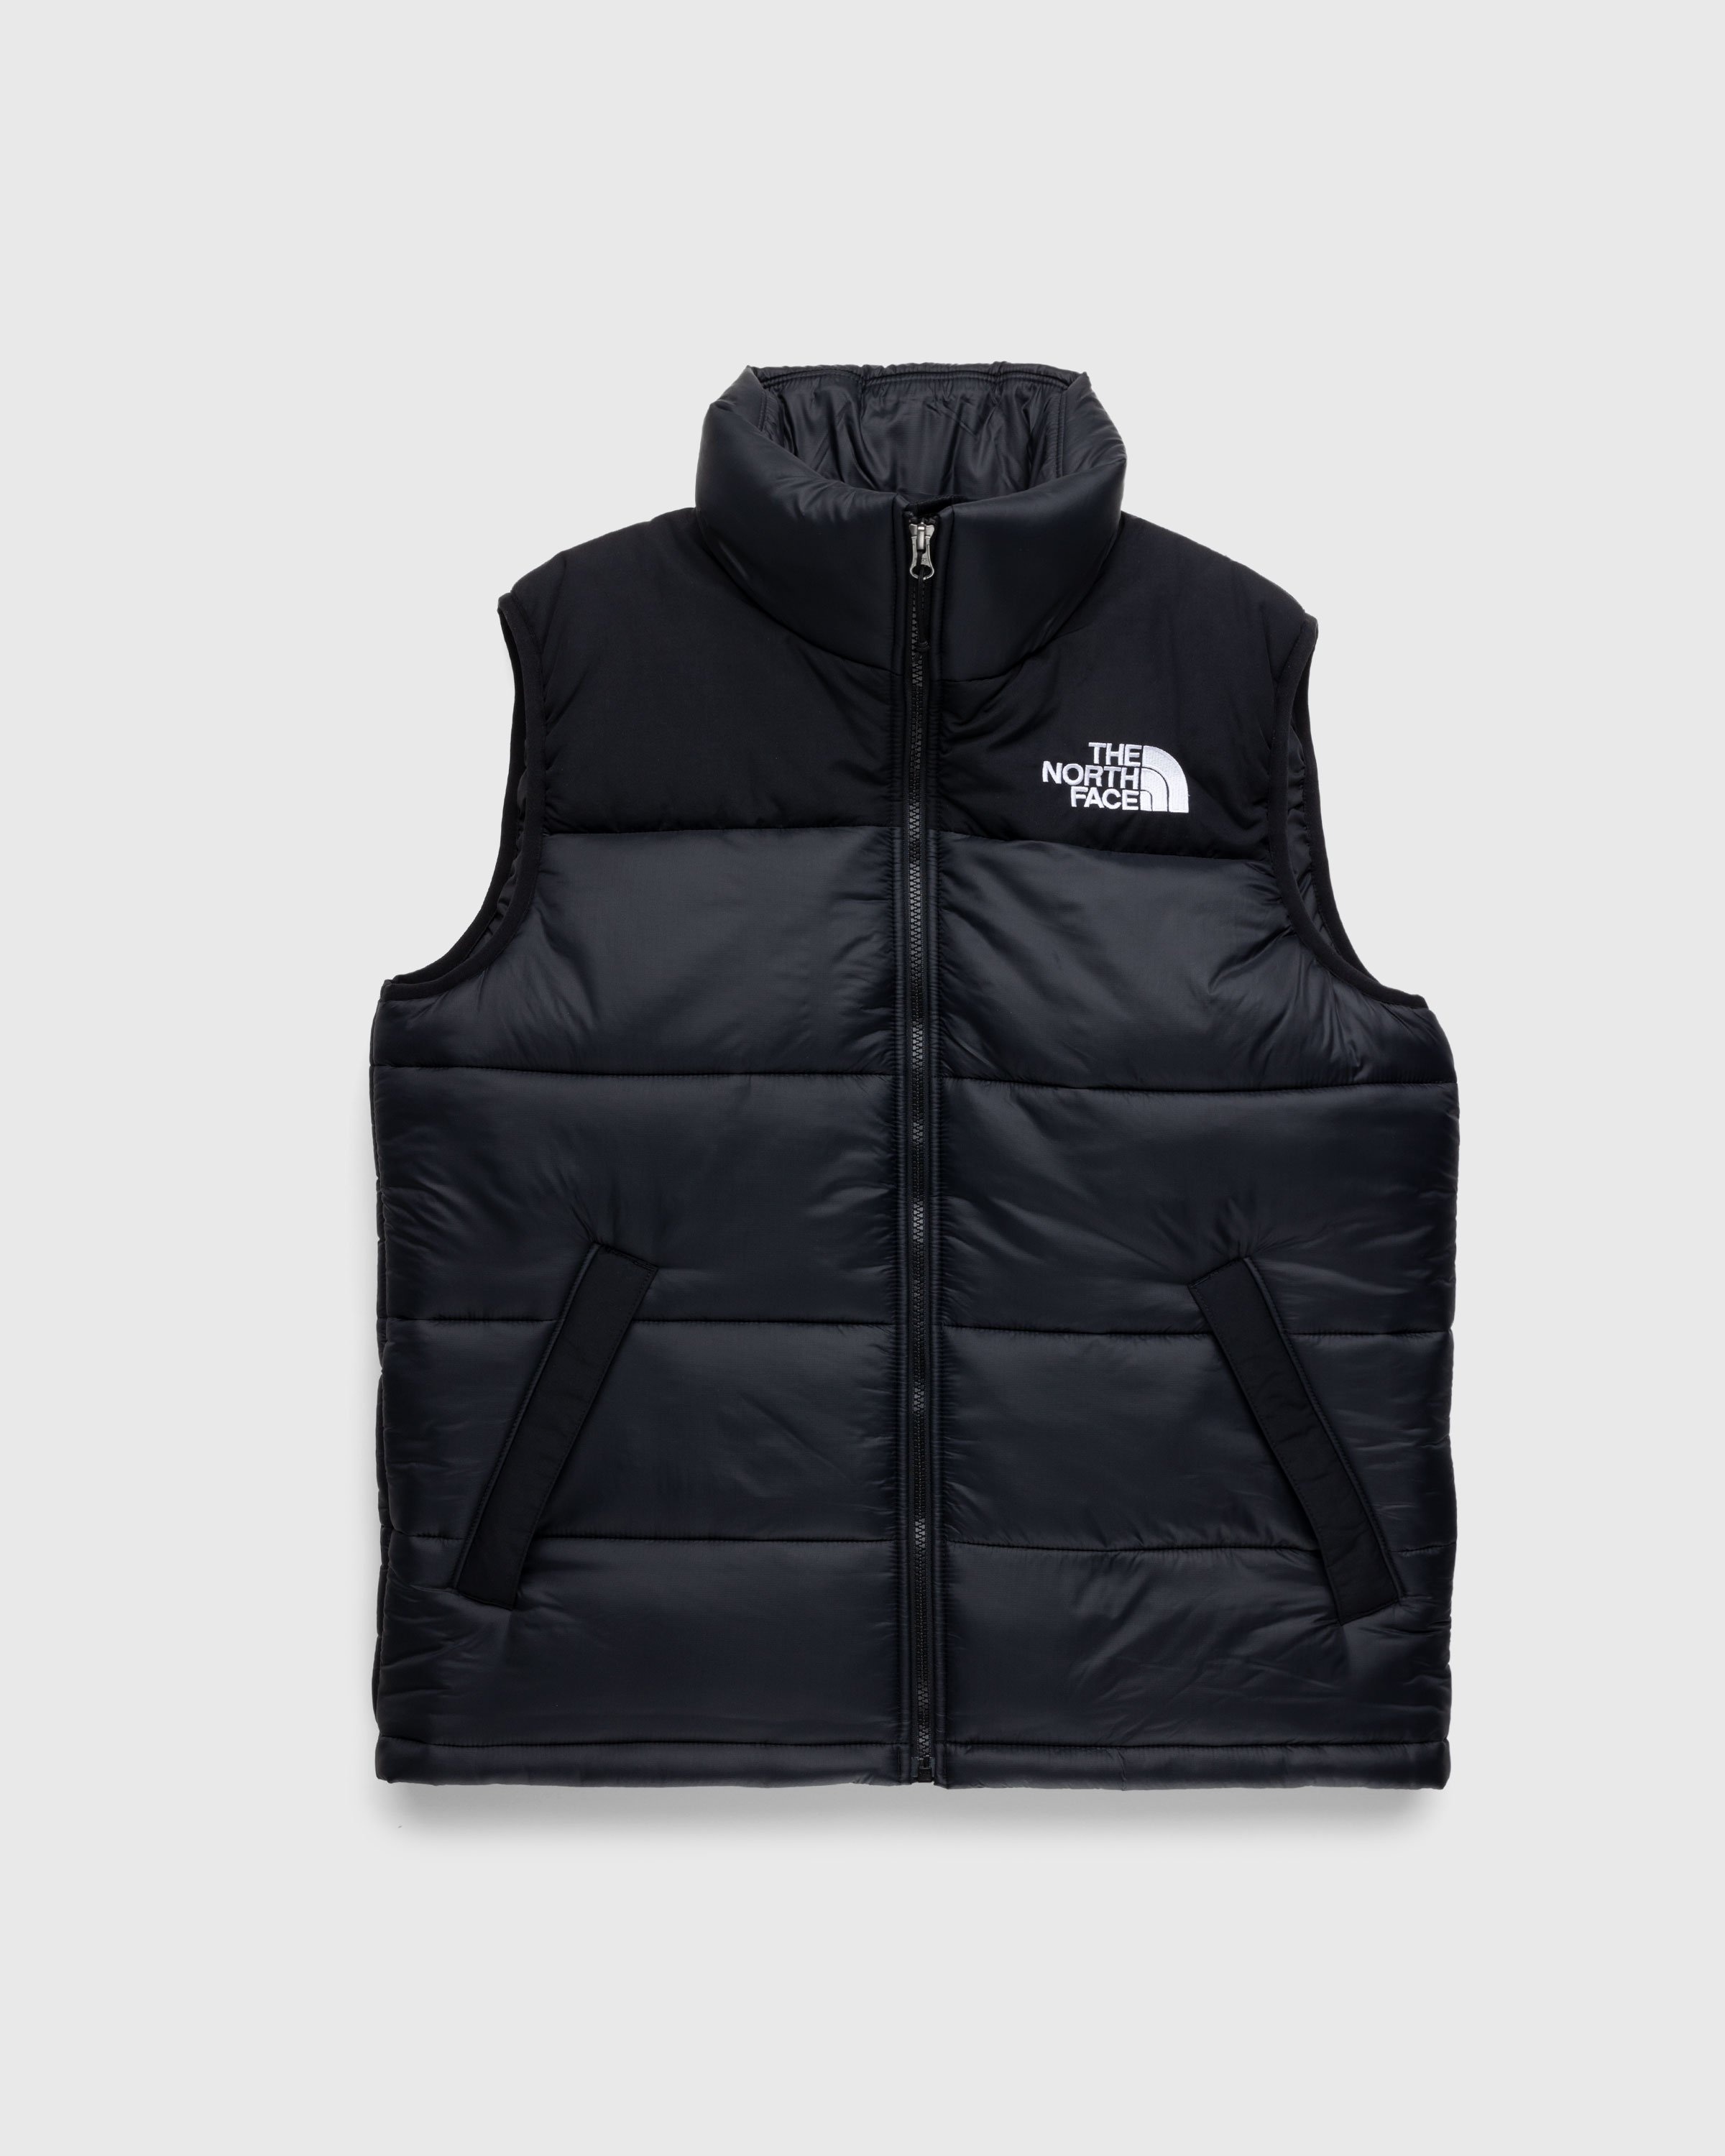 The North Face – Himalayan Synth Vest TNF Black - Outerwear - Black - Image 1